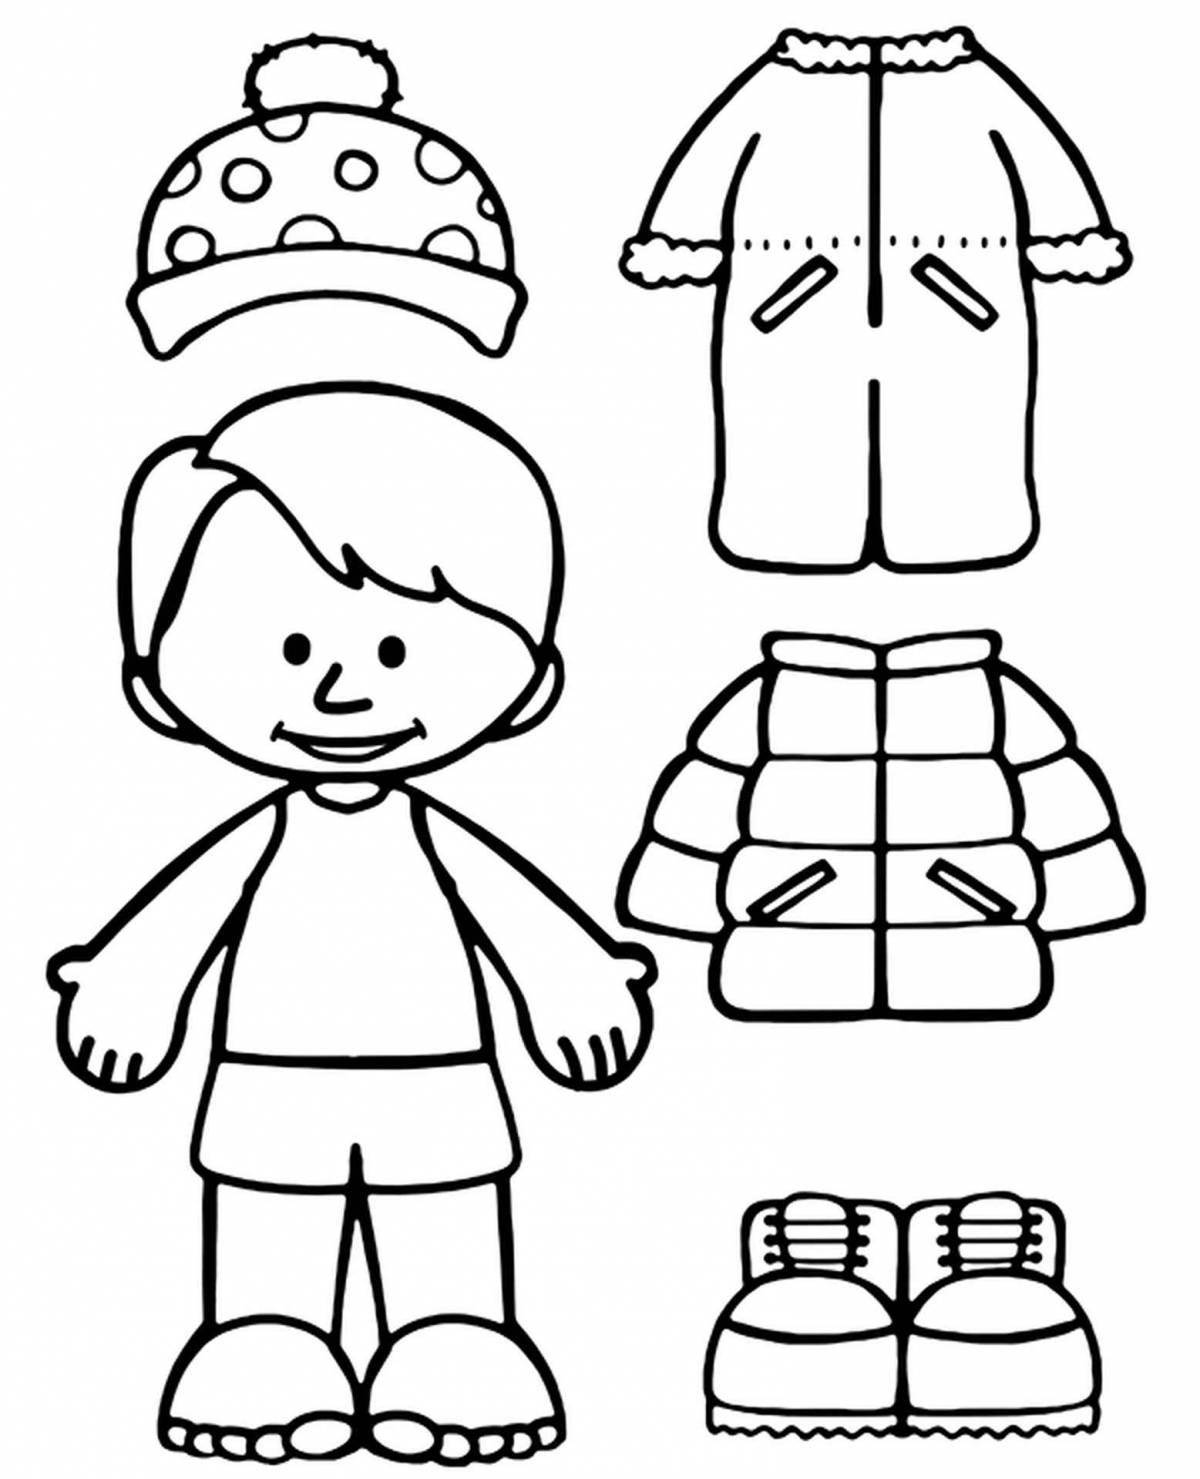 Coloring clothes for children 2-3 years old